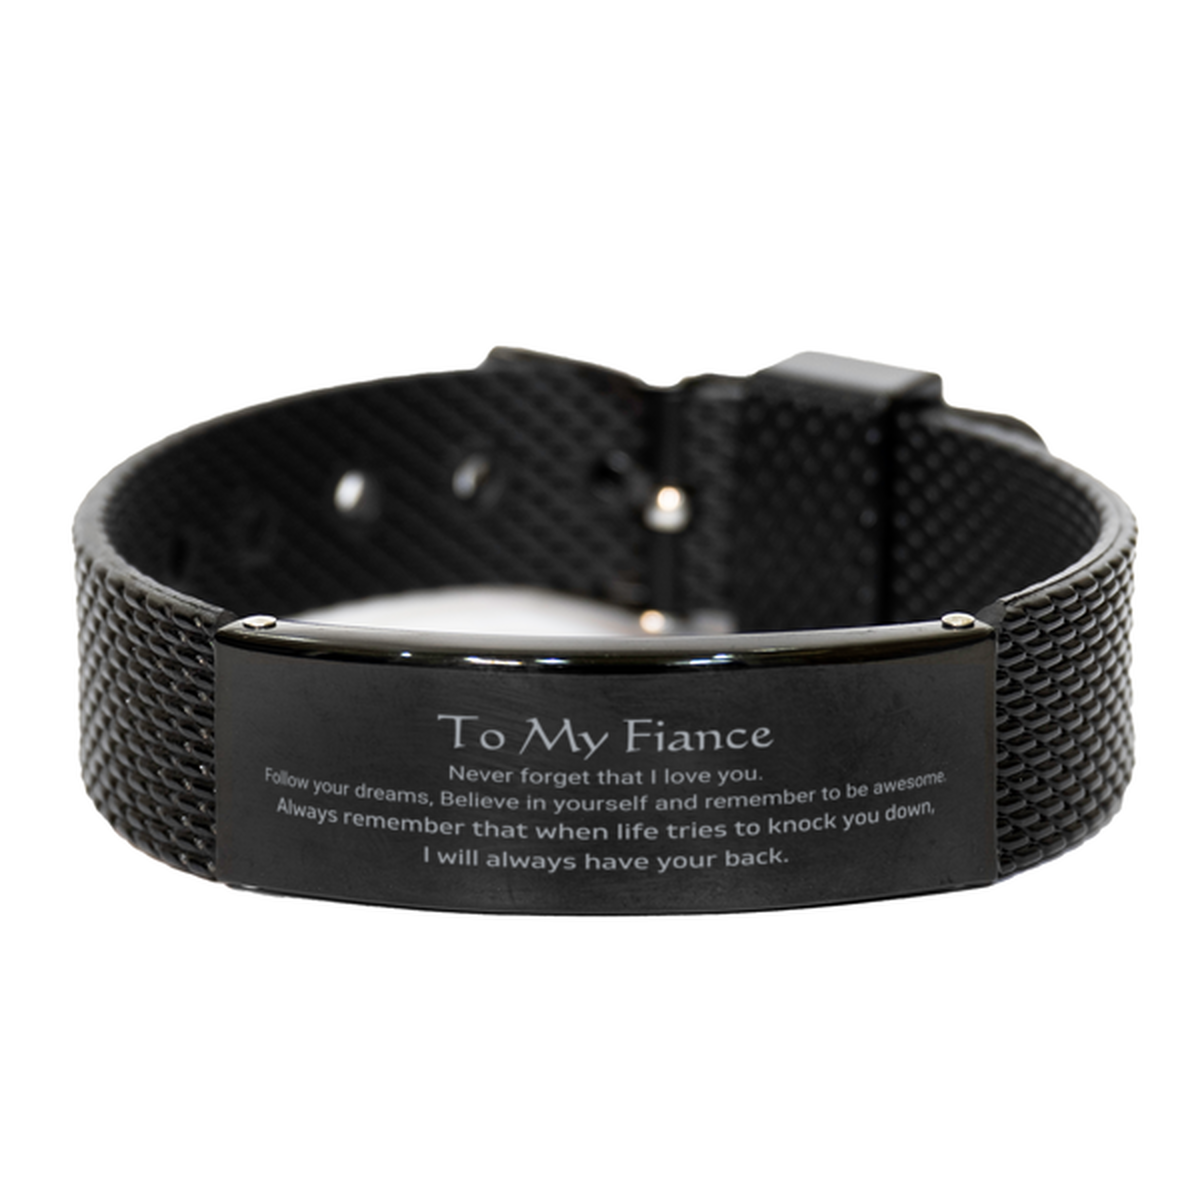 Inspirational Gifts for Fiance, Follow your dreams, Believe in yourself, Fiance Black Shark Mesh Bracelet, Birthday Christmas Unique Gifts For Fiance